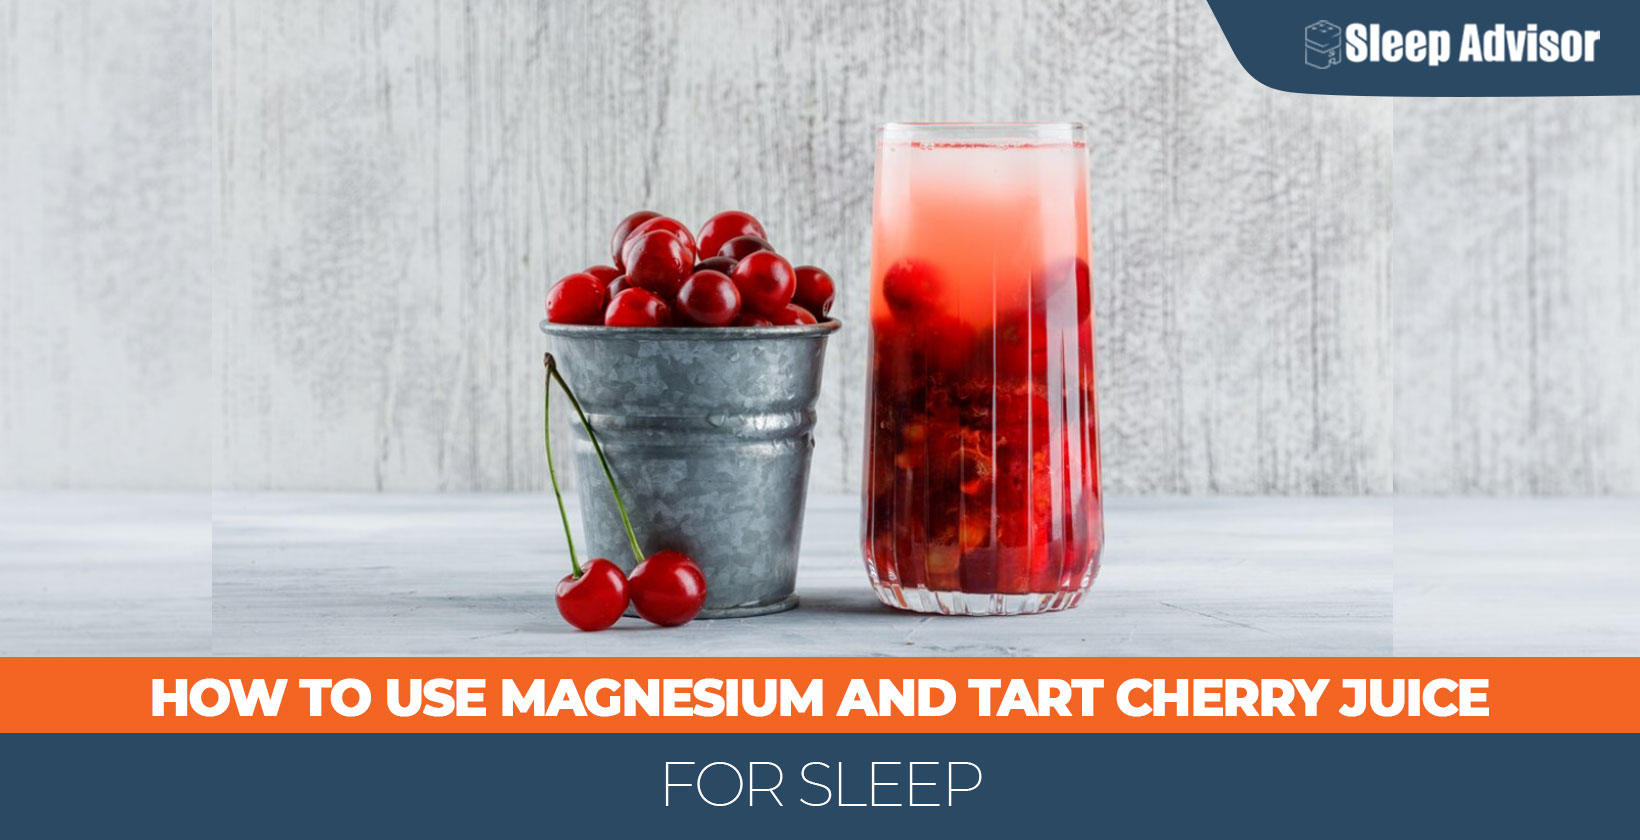 How to Use Magnesium and Tart Cherry Juice for Sleep